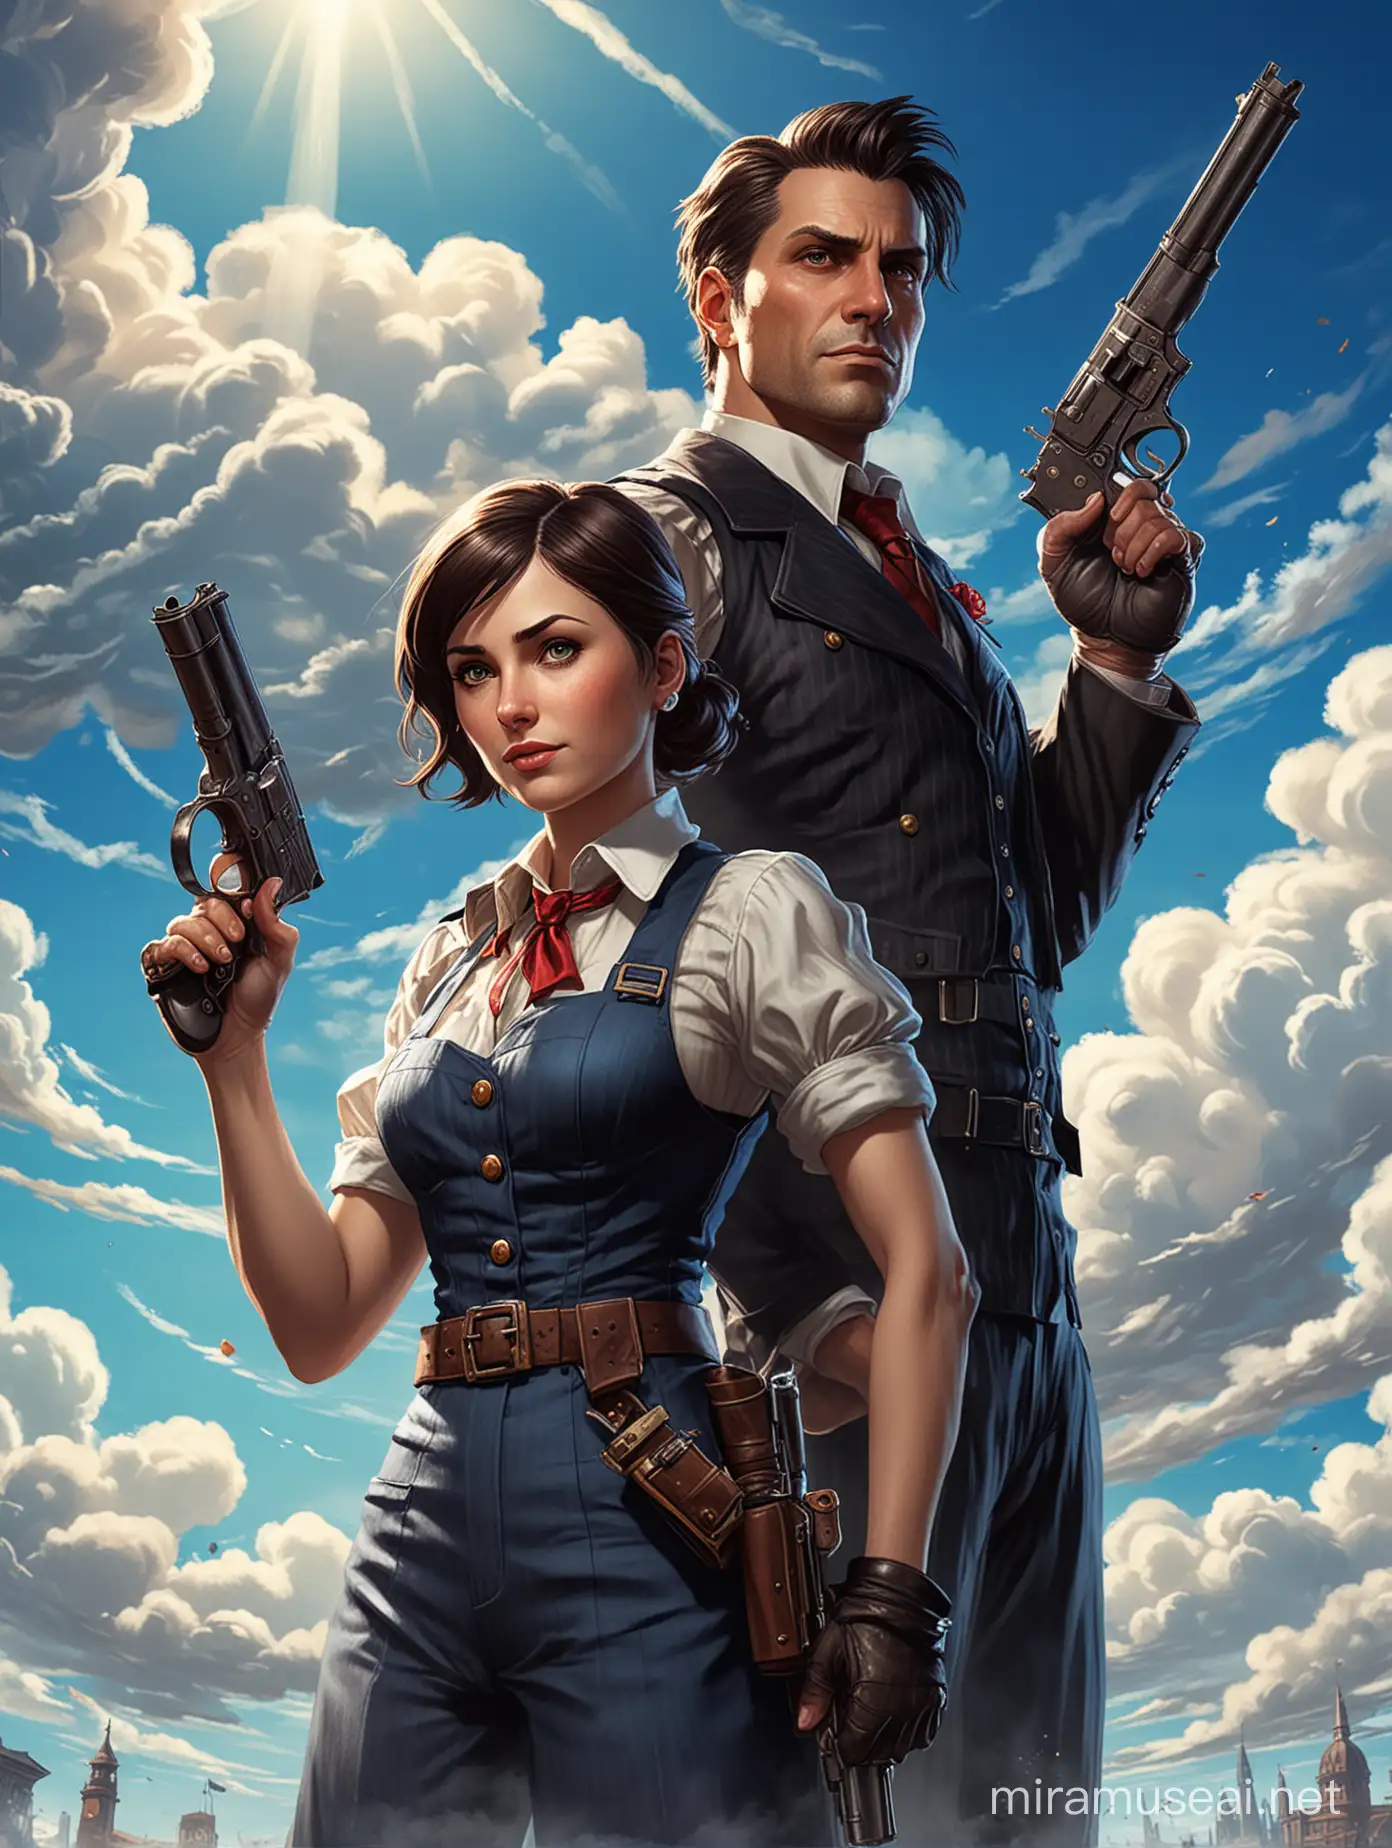 Bioshock Infinites Booker Dewitt and The Boys Anni Starlight with Pistol on a Cloudy Blue Sky Background